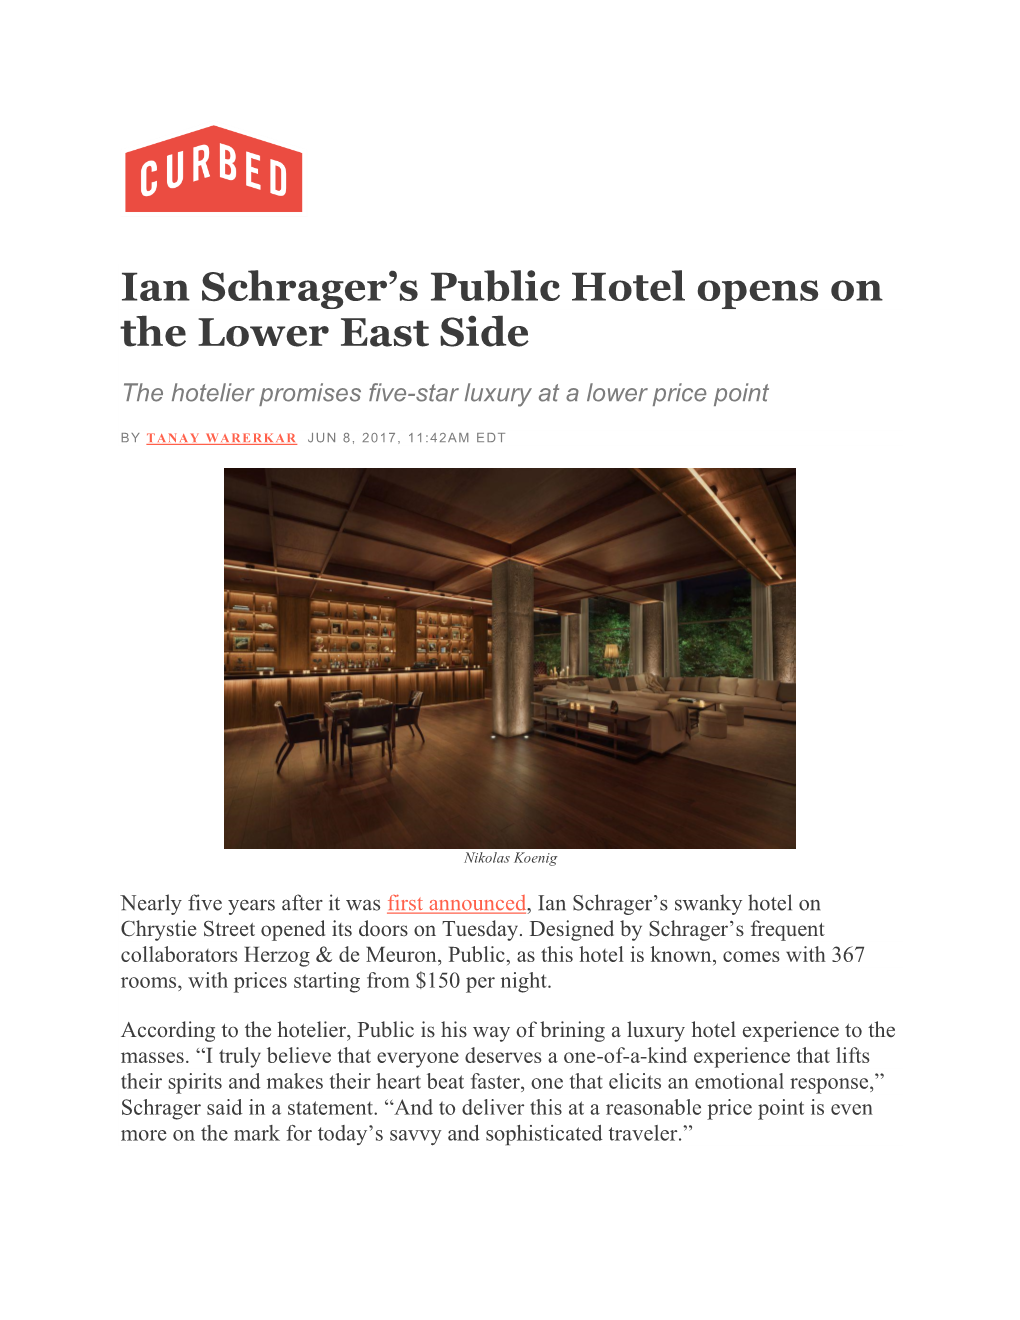 Ian Schrager's Public Hotel Opens on the Lower East Side